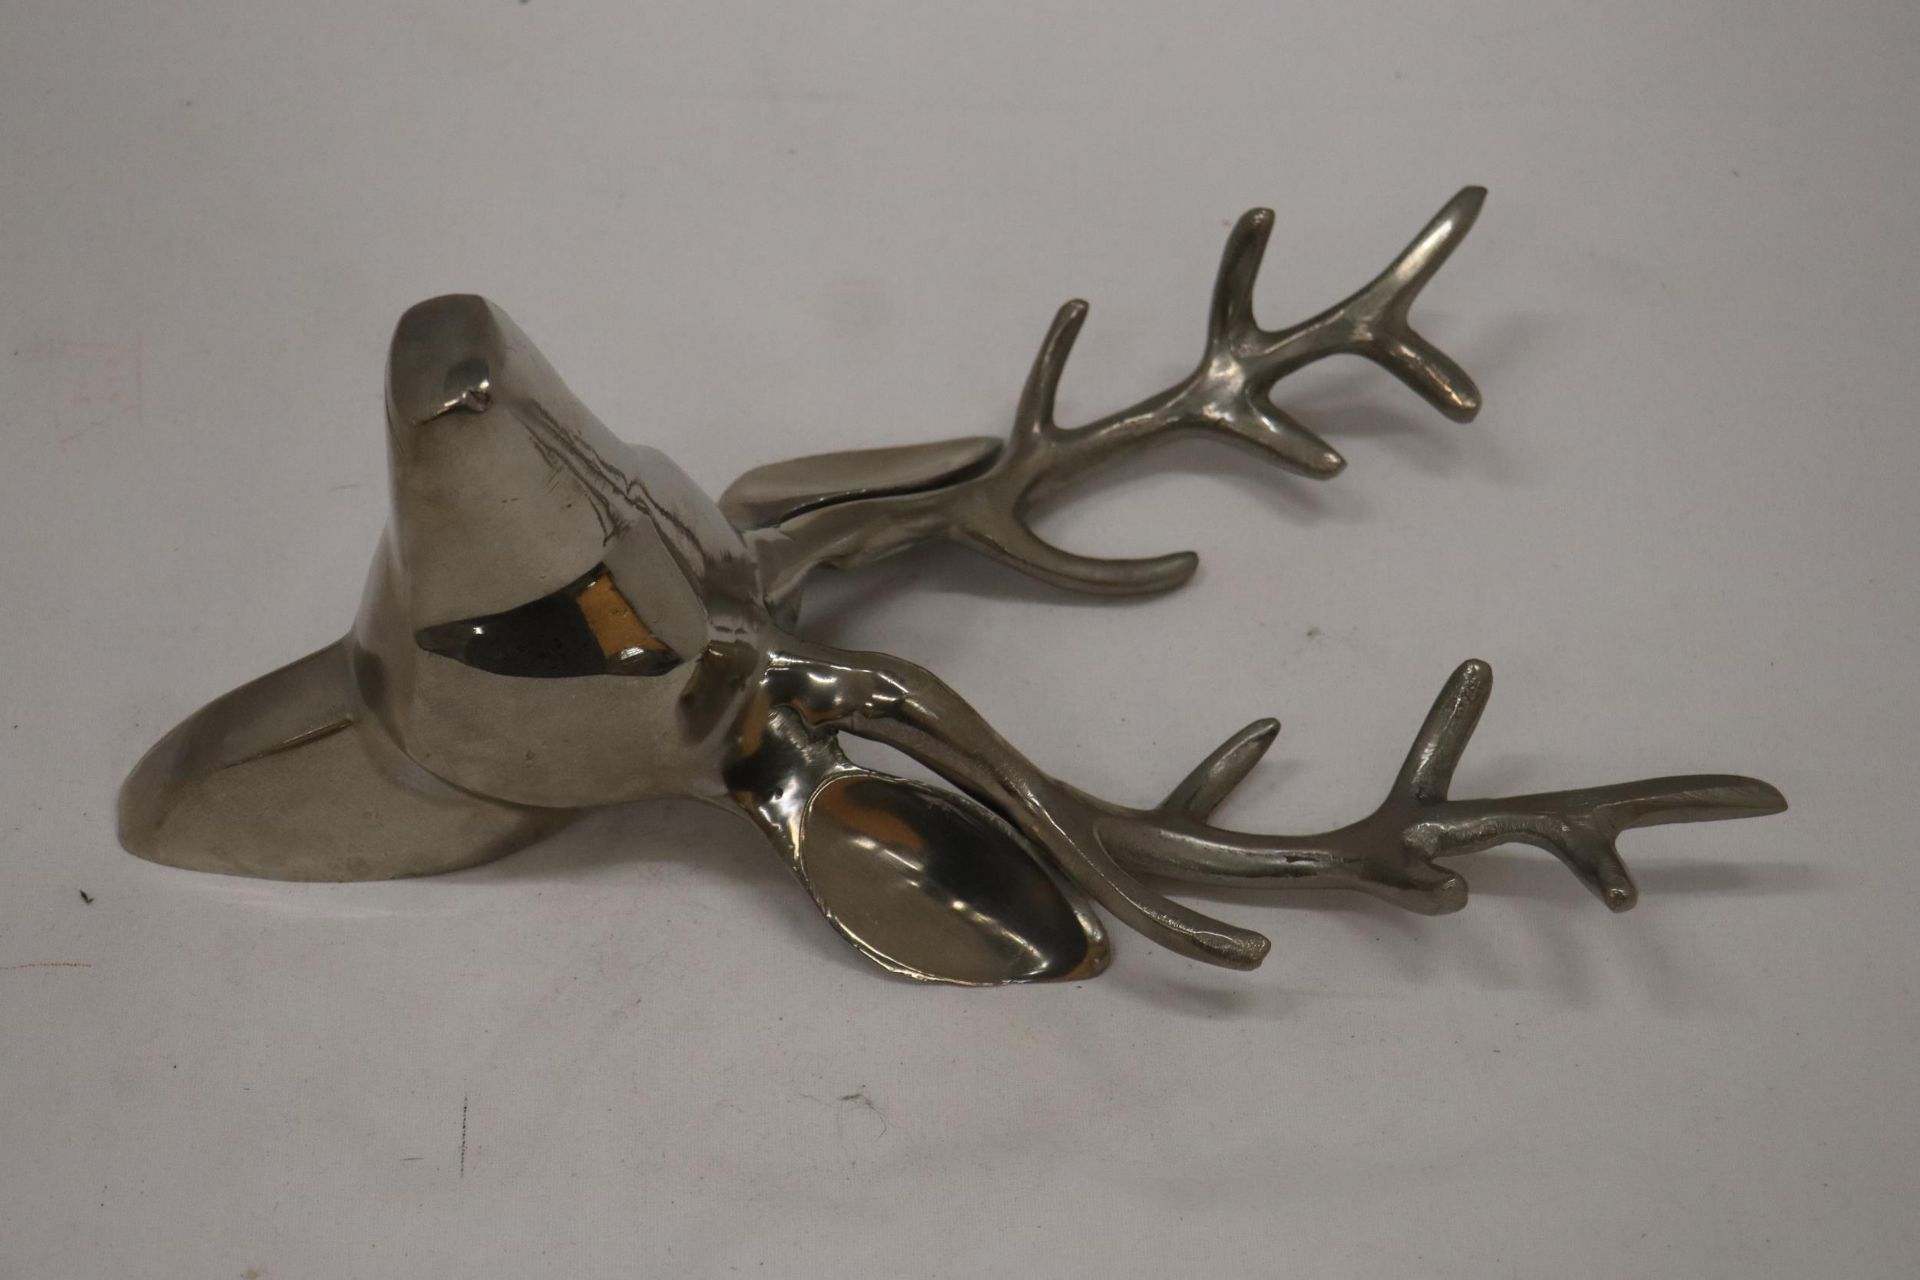 A STAINLESS STEEL DEER WALL HANGING - Image 5 of 5